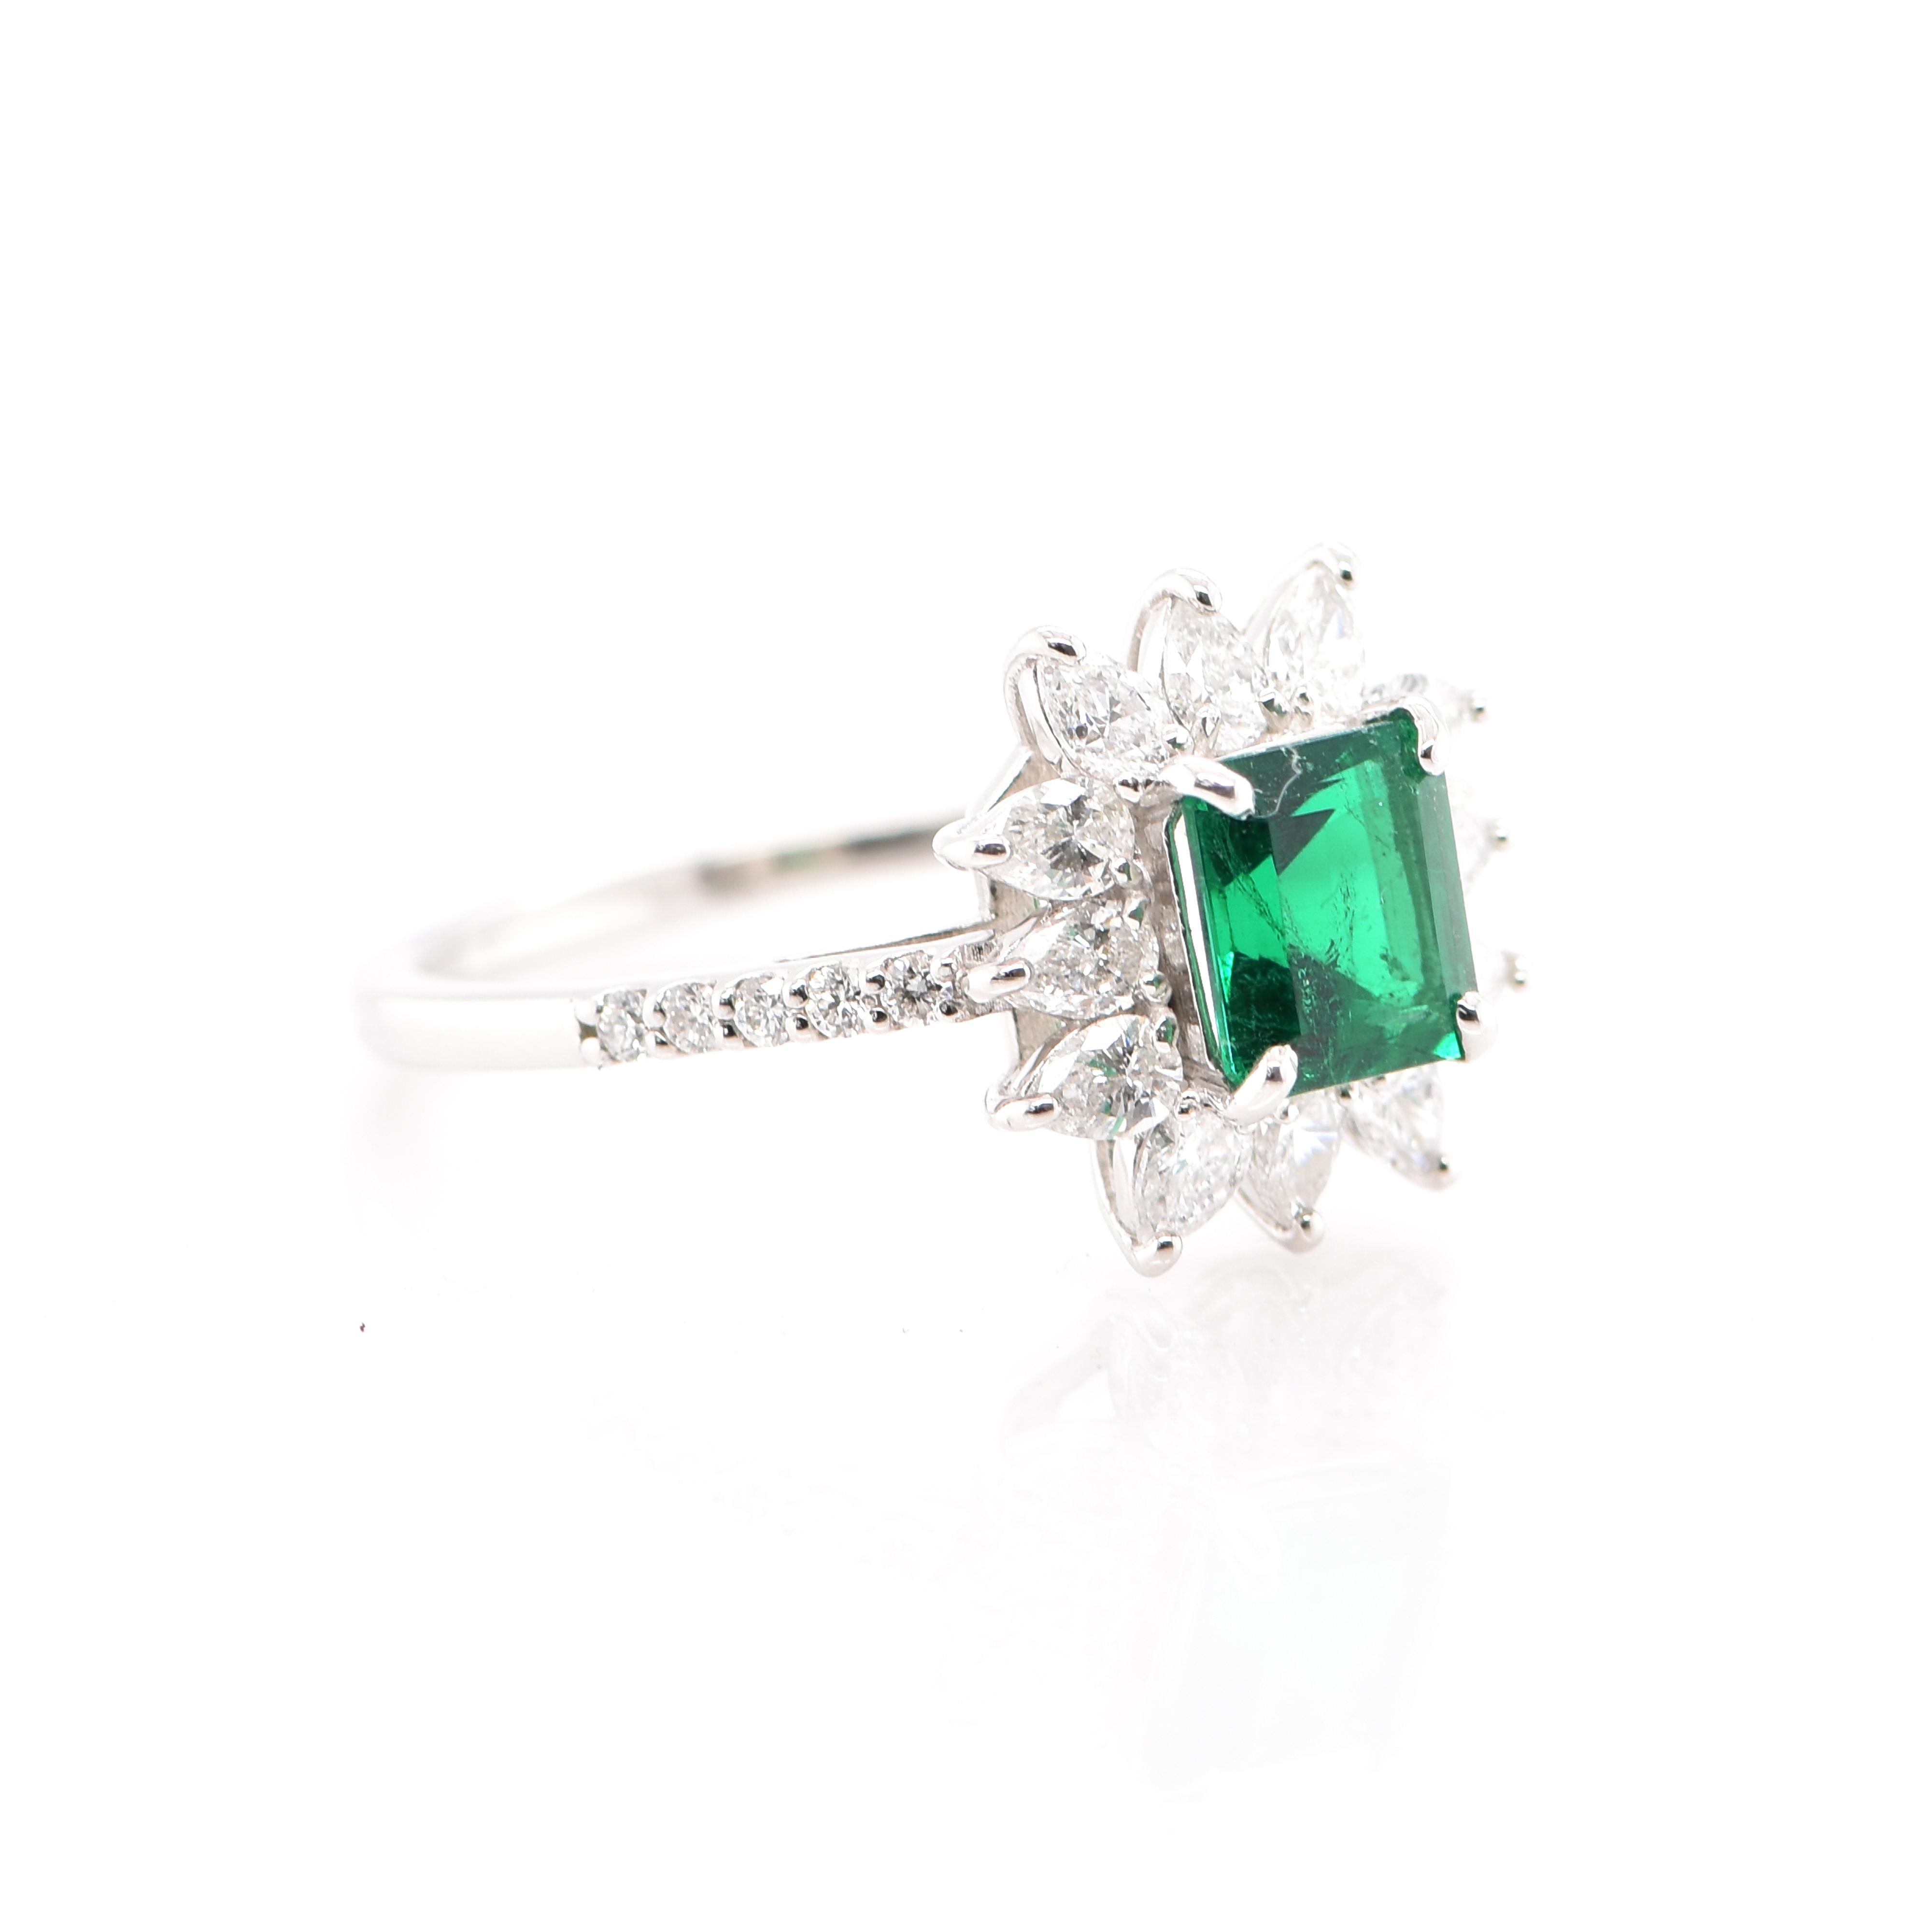 Modern GIA Certified 0.91 Carat Untreated 'No Oil' Colombian Emerald Ring For Sale